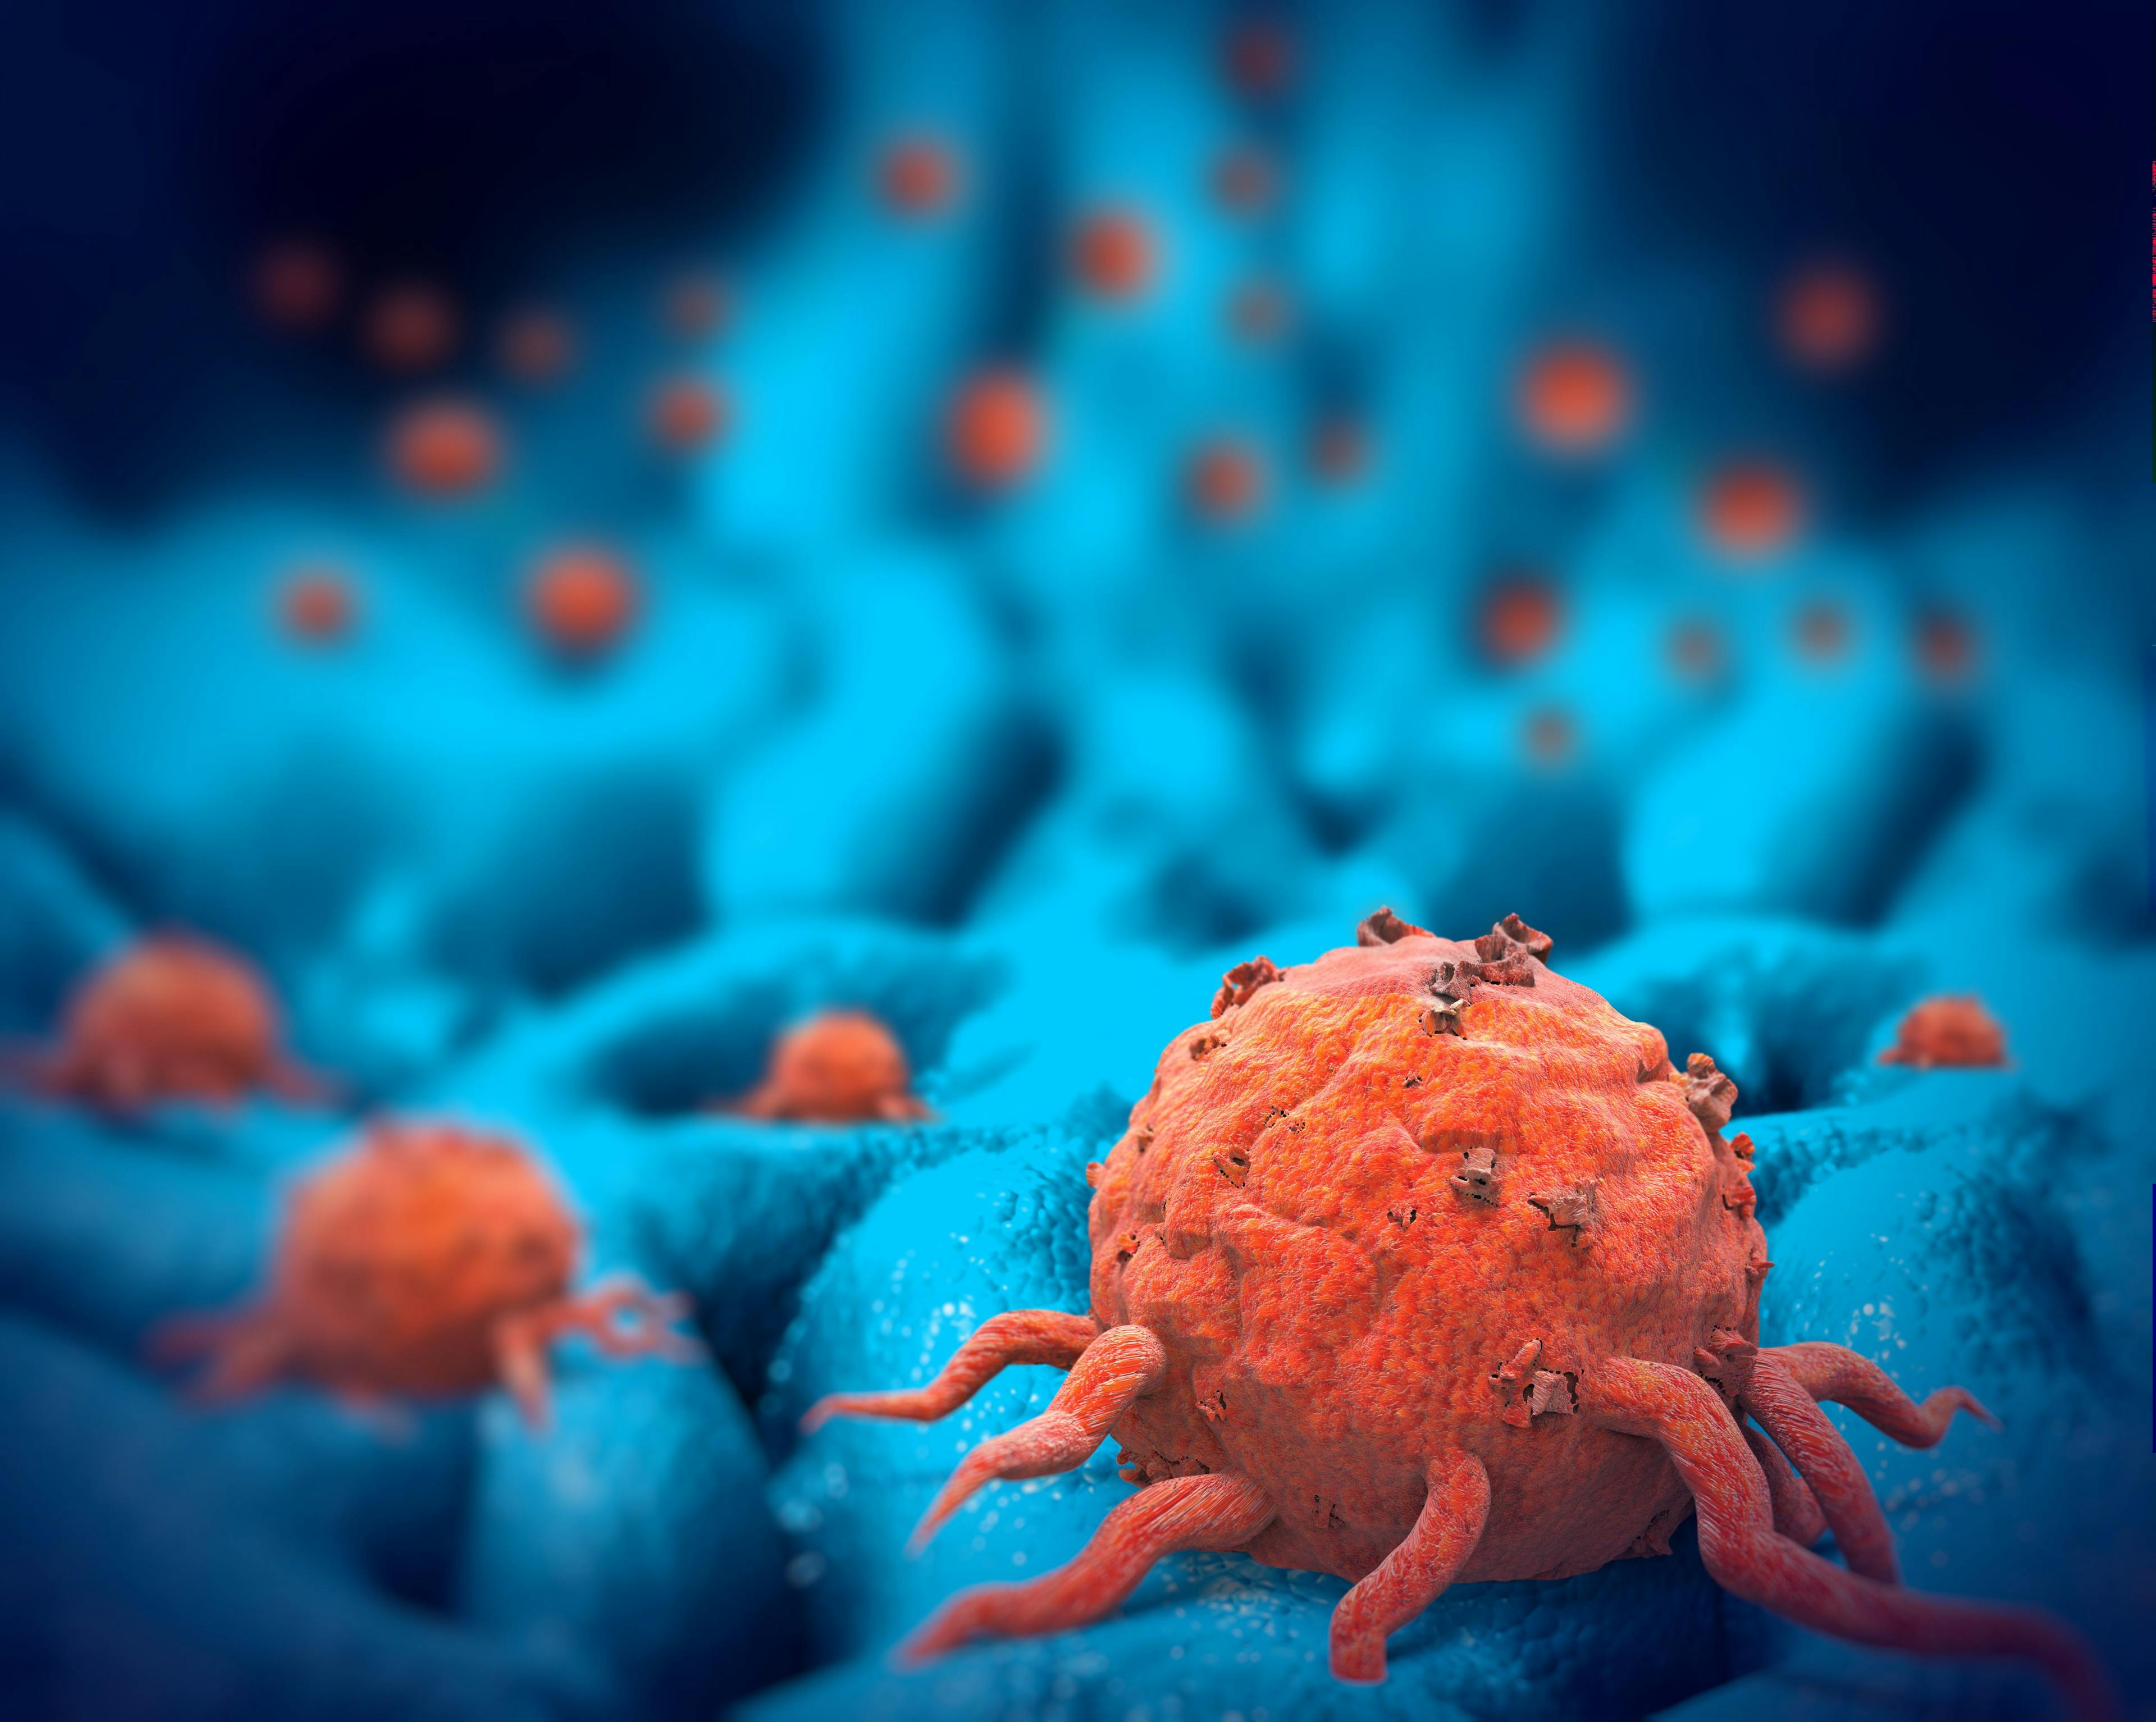 Investigational Immunotherapy Shows Promise for Treatment of Advanced Ovarian Cancer